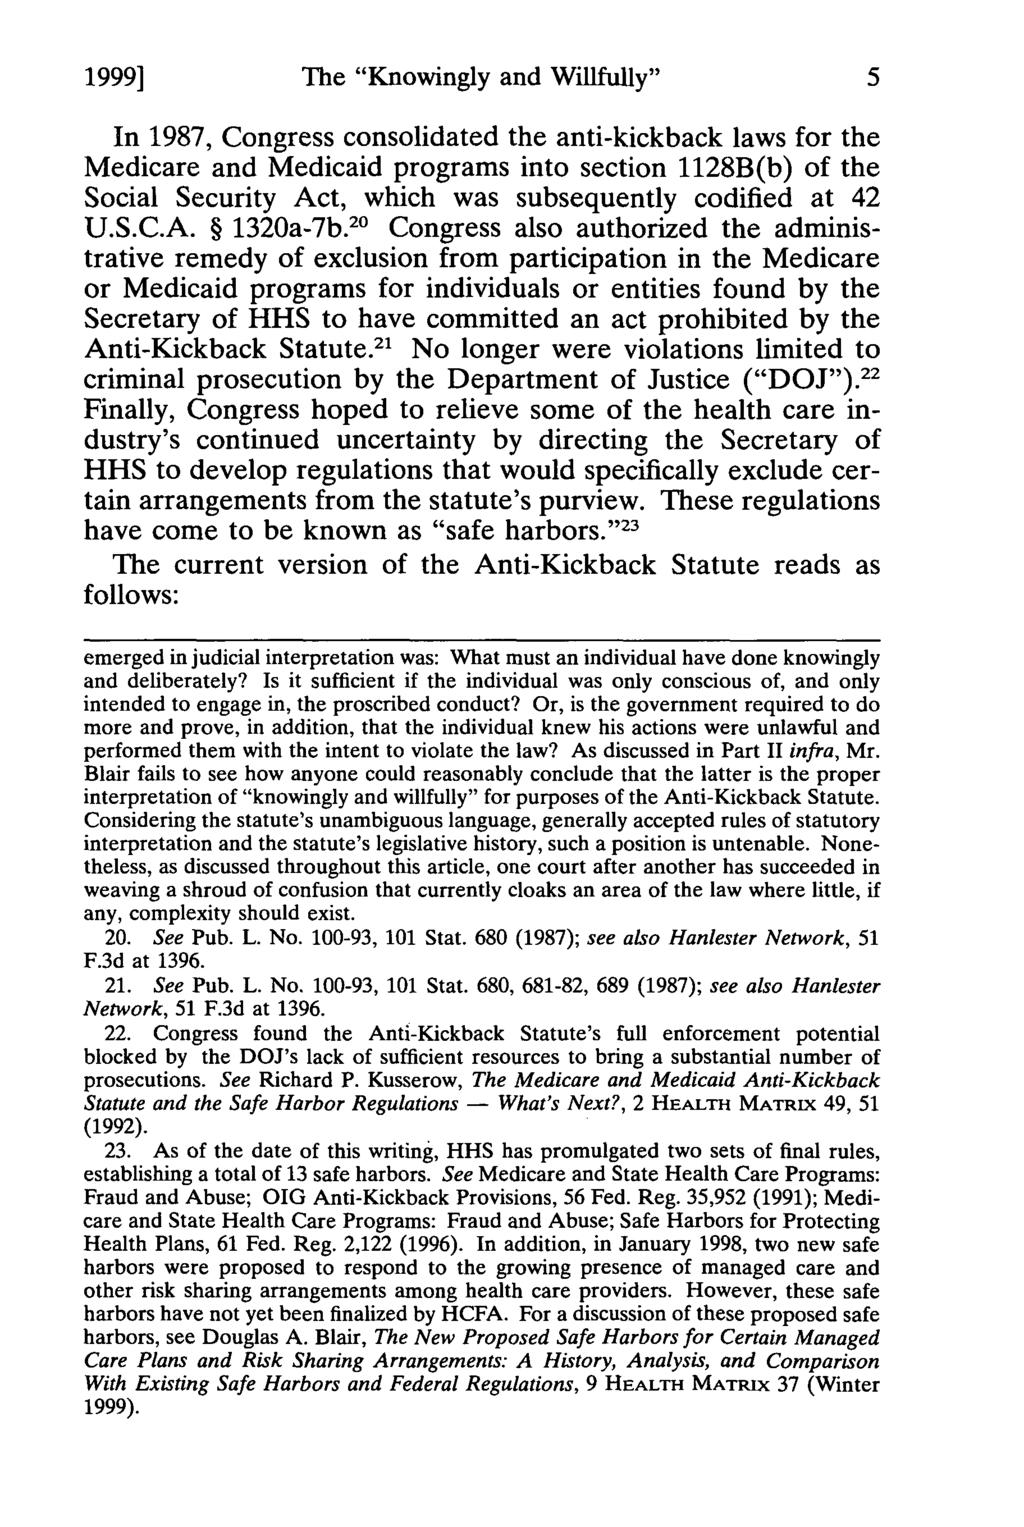 Blair: The "Knowingly and Willfully" Continuum of the Anti-Kickback Stat 1999] The "Knowingly and Willfully" In 1987, Congress consolidated the anti-kickback laws for the Medicare and Medicaid